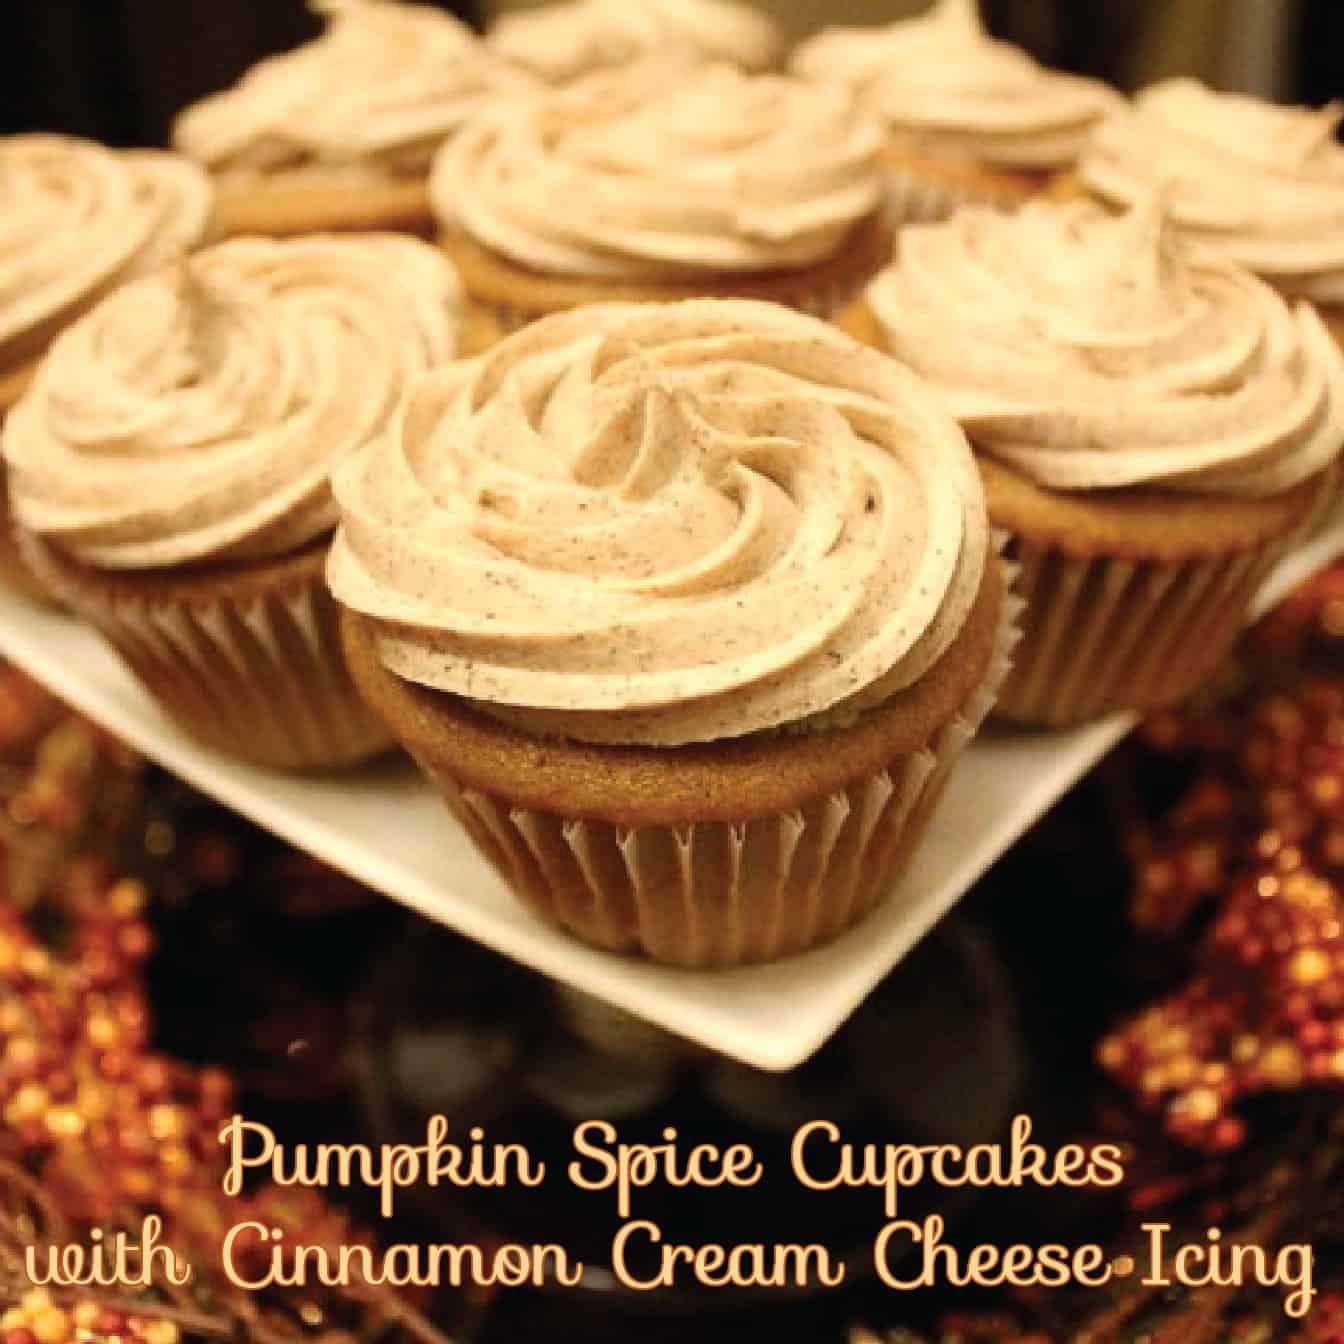 Easy Peasy Pumpkin Spice Cupcakes With Cinnamon Cream Cheese Icing ...